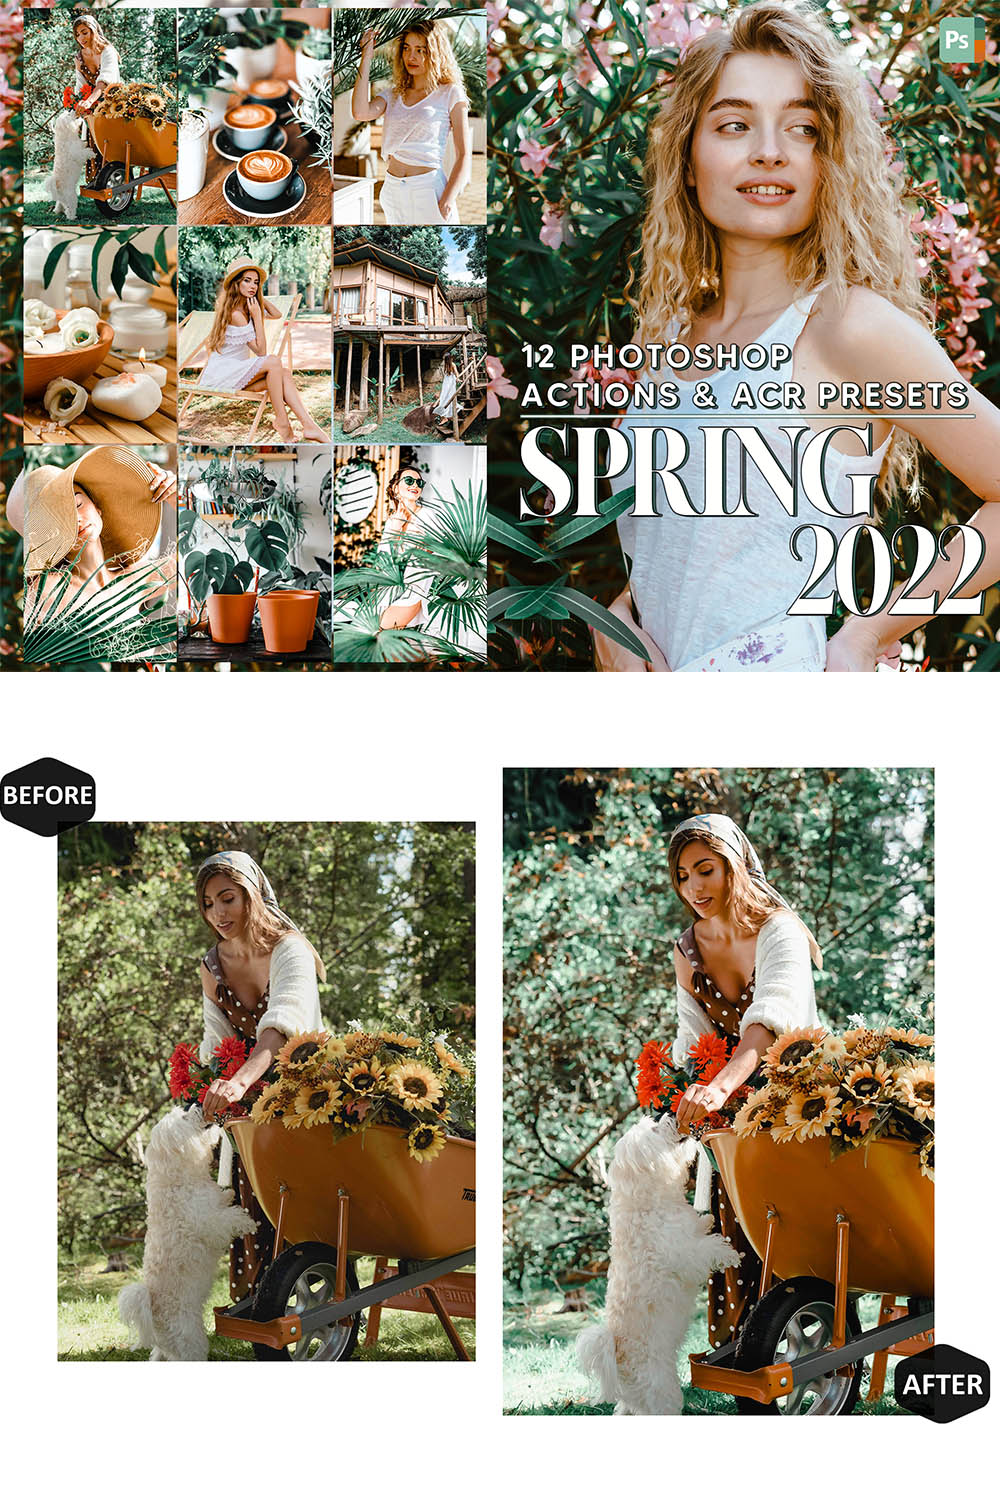 12 Spring 2022, Brown Ps Action, Warm Skin ACR Preset, Bright Ps Filter, Landscape Portrait And Lifestyle Theme For Instagram, Blogger pinterest preview image.